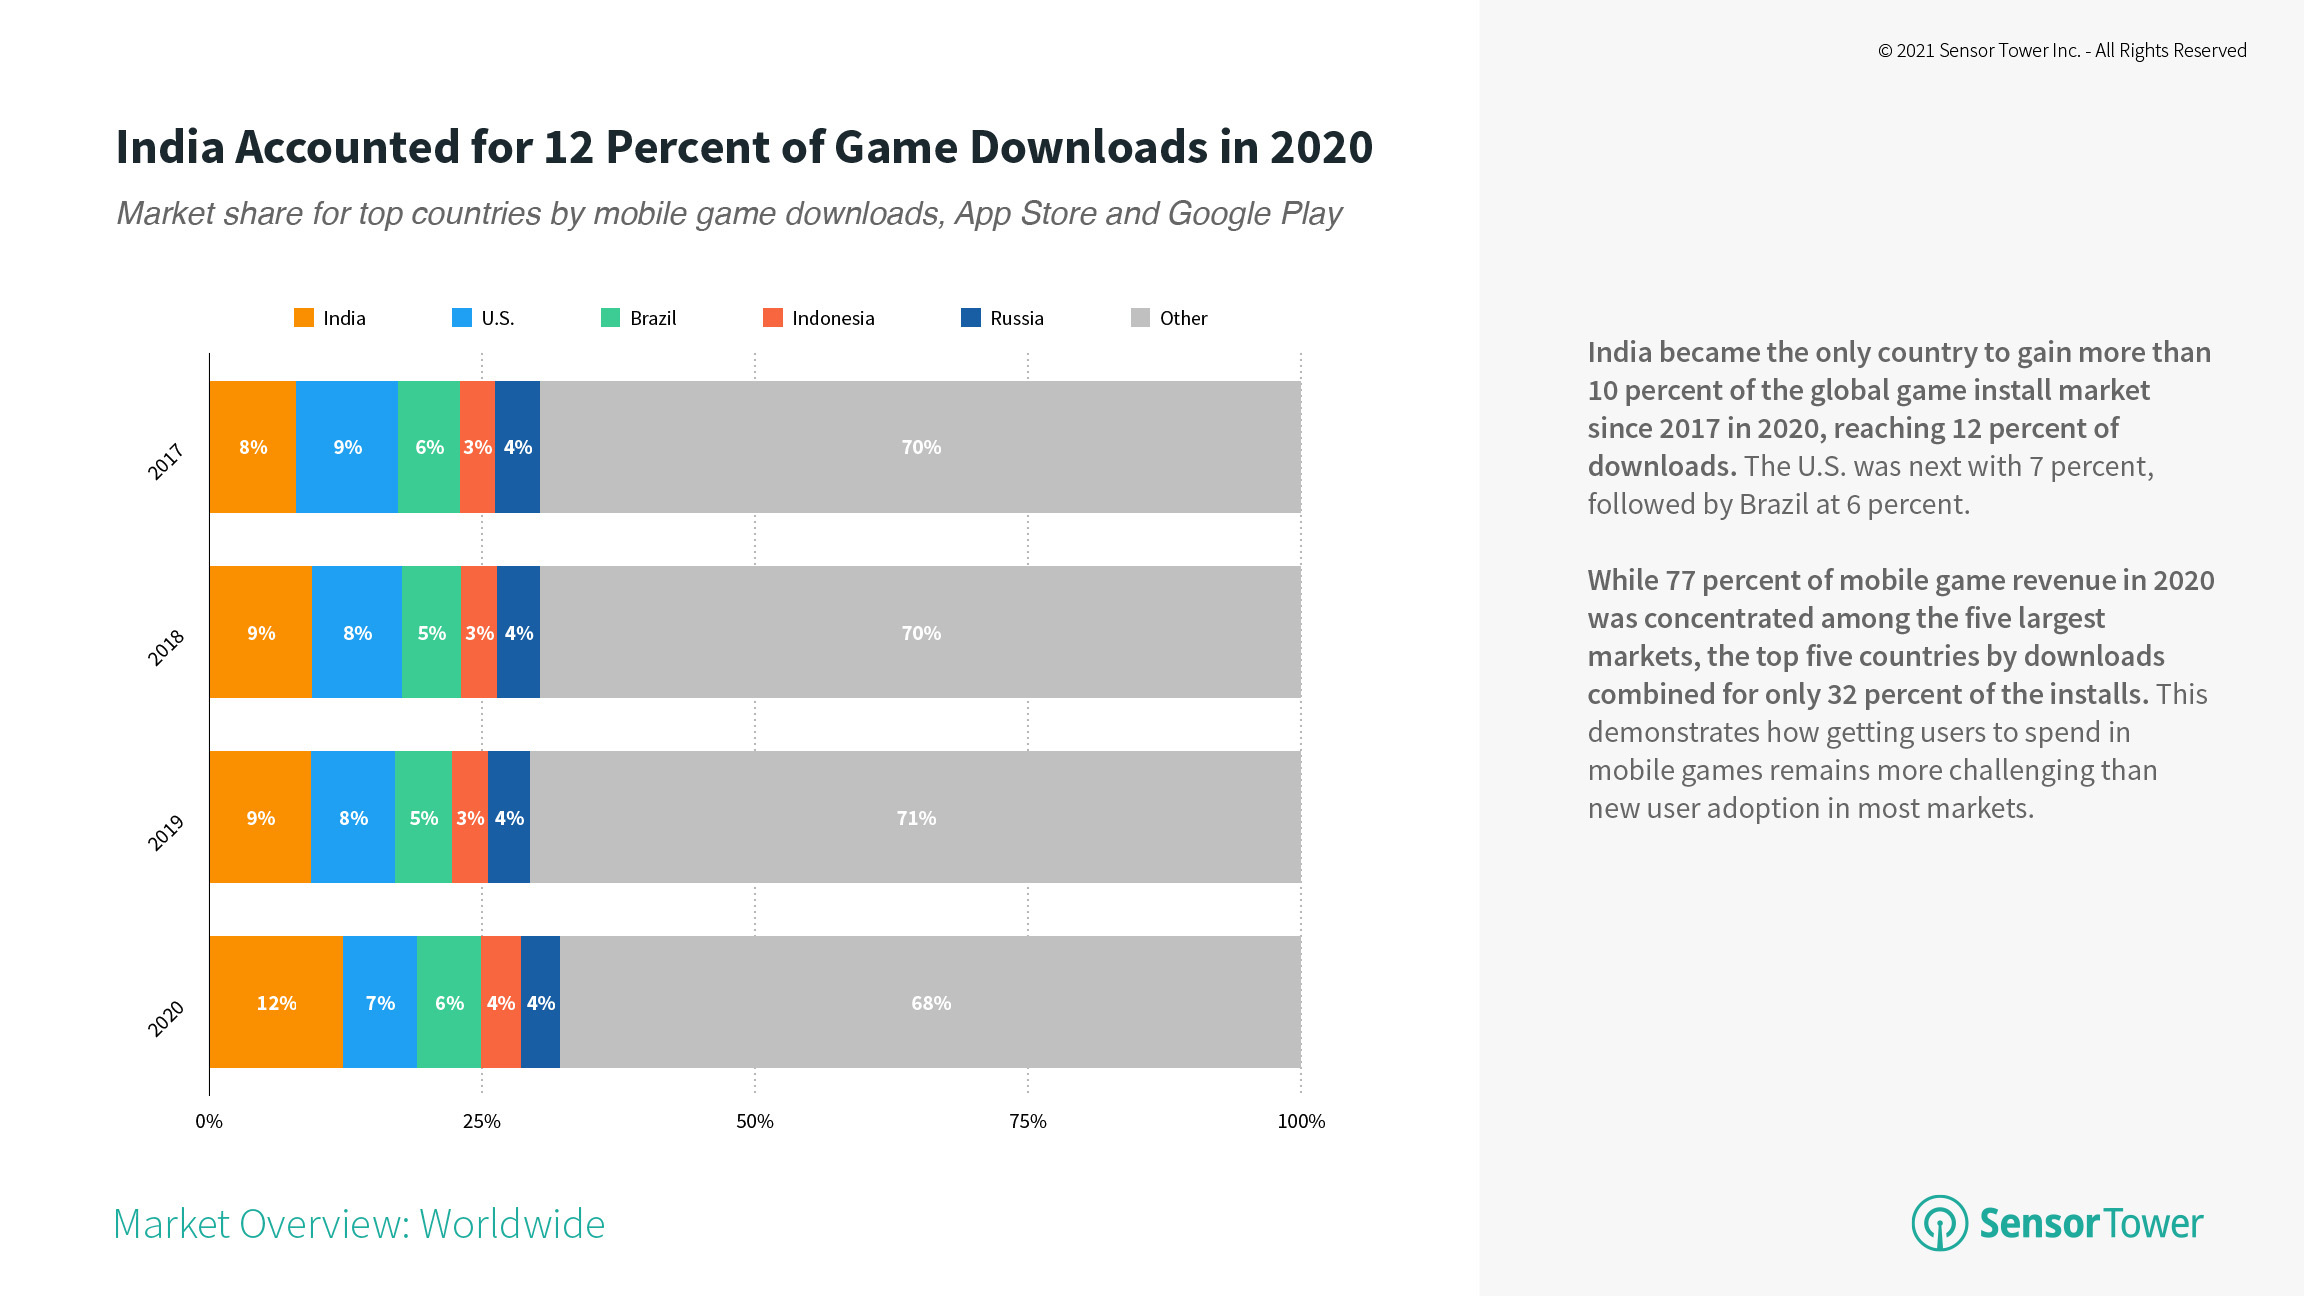 Market share for top countries by mobile game downloads 2017 to 2020